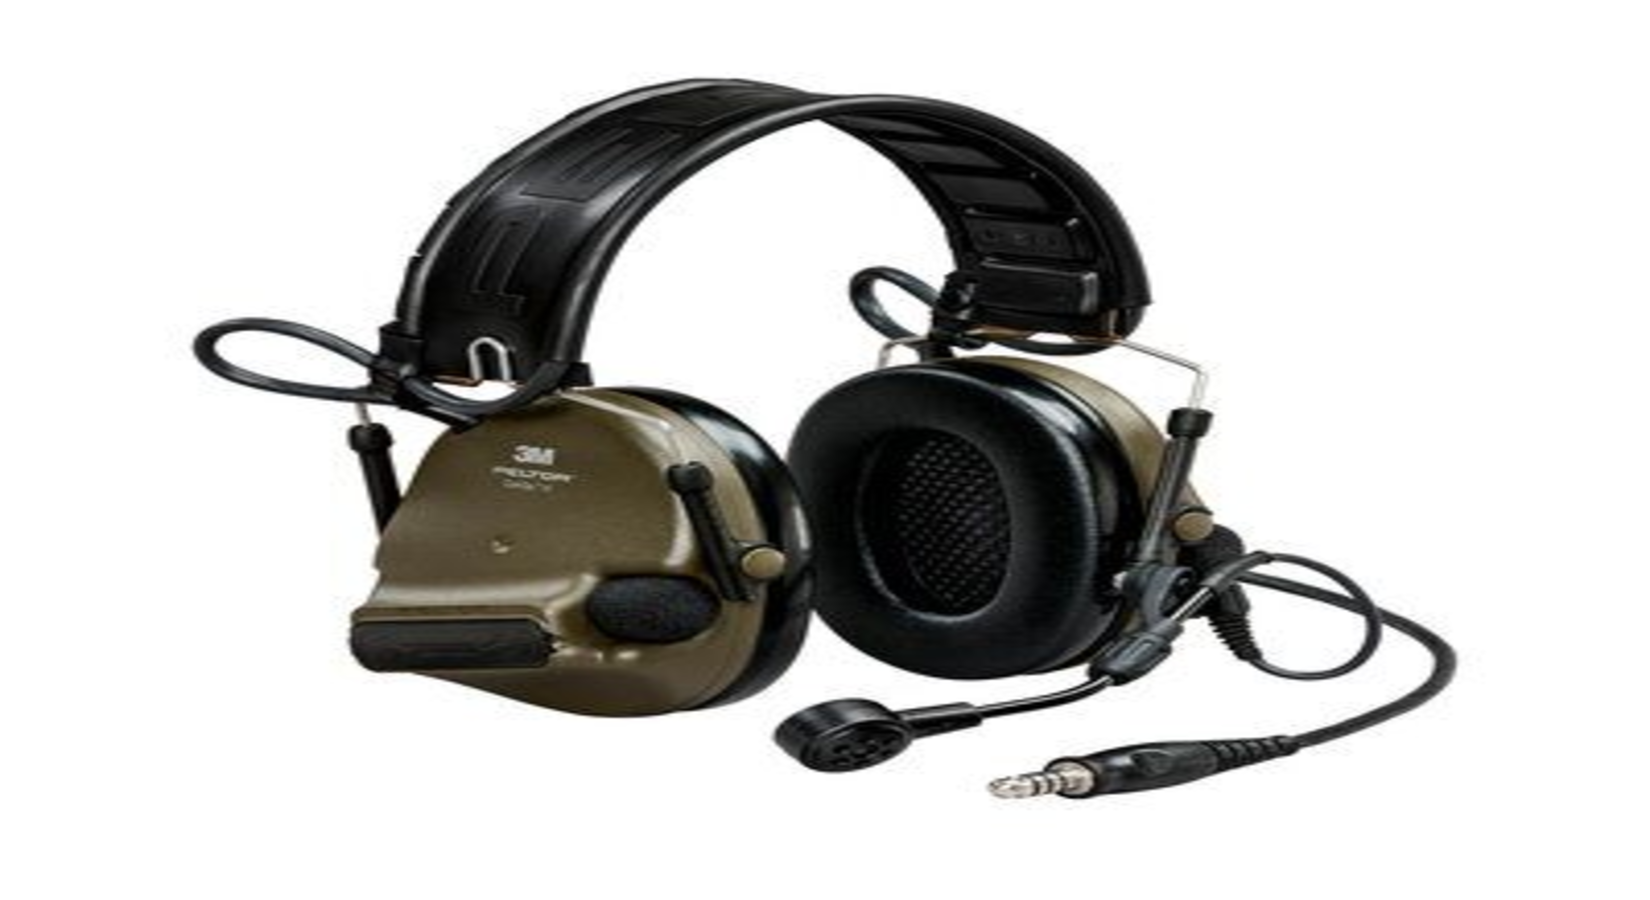 The Difference Between the Liberator IV and ComTac IV Headsets